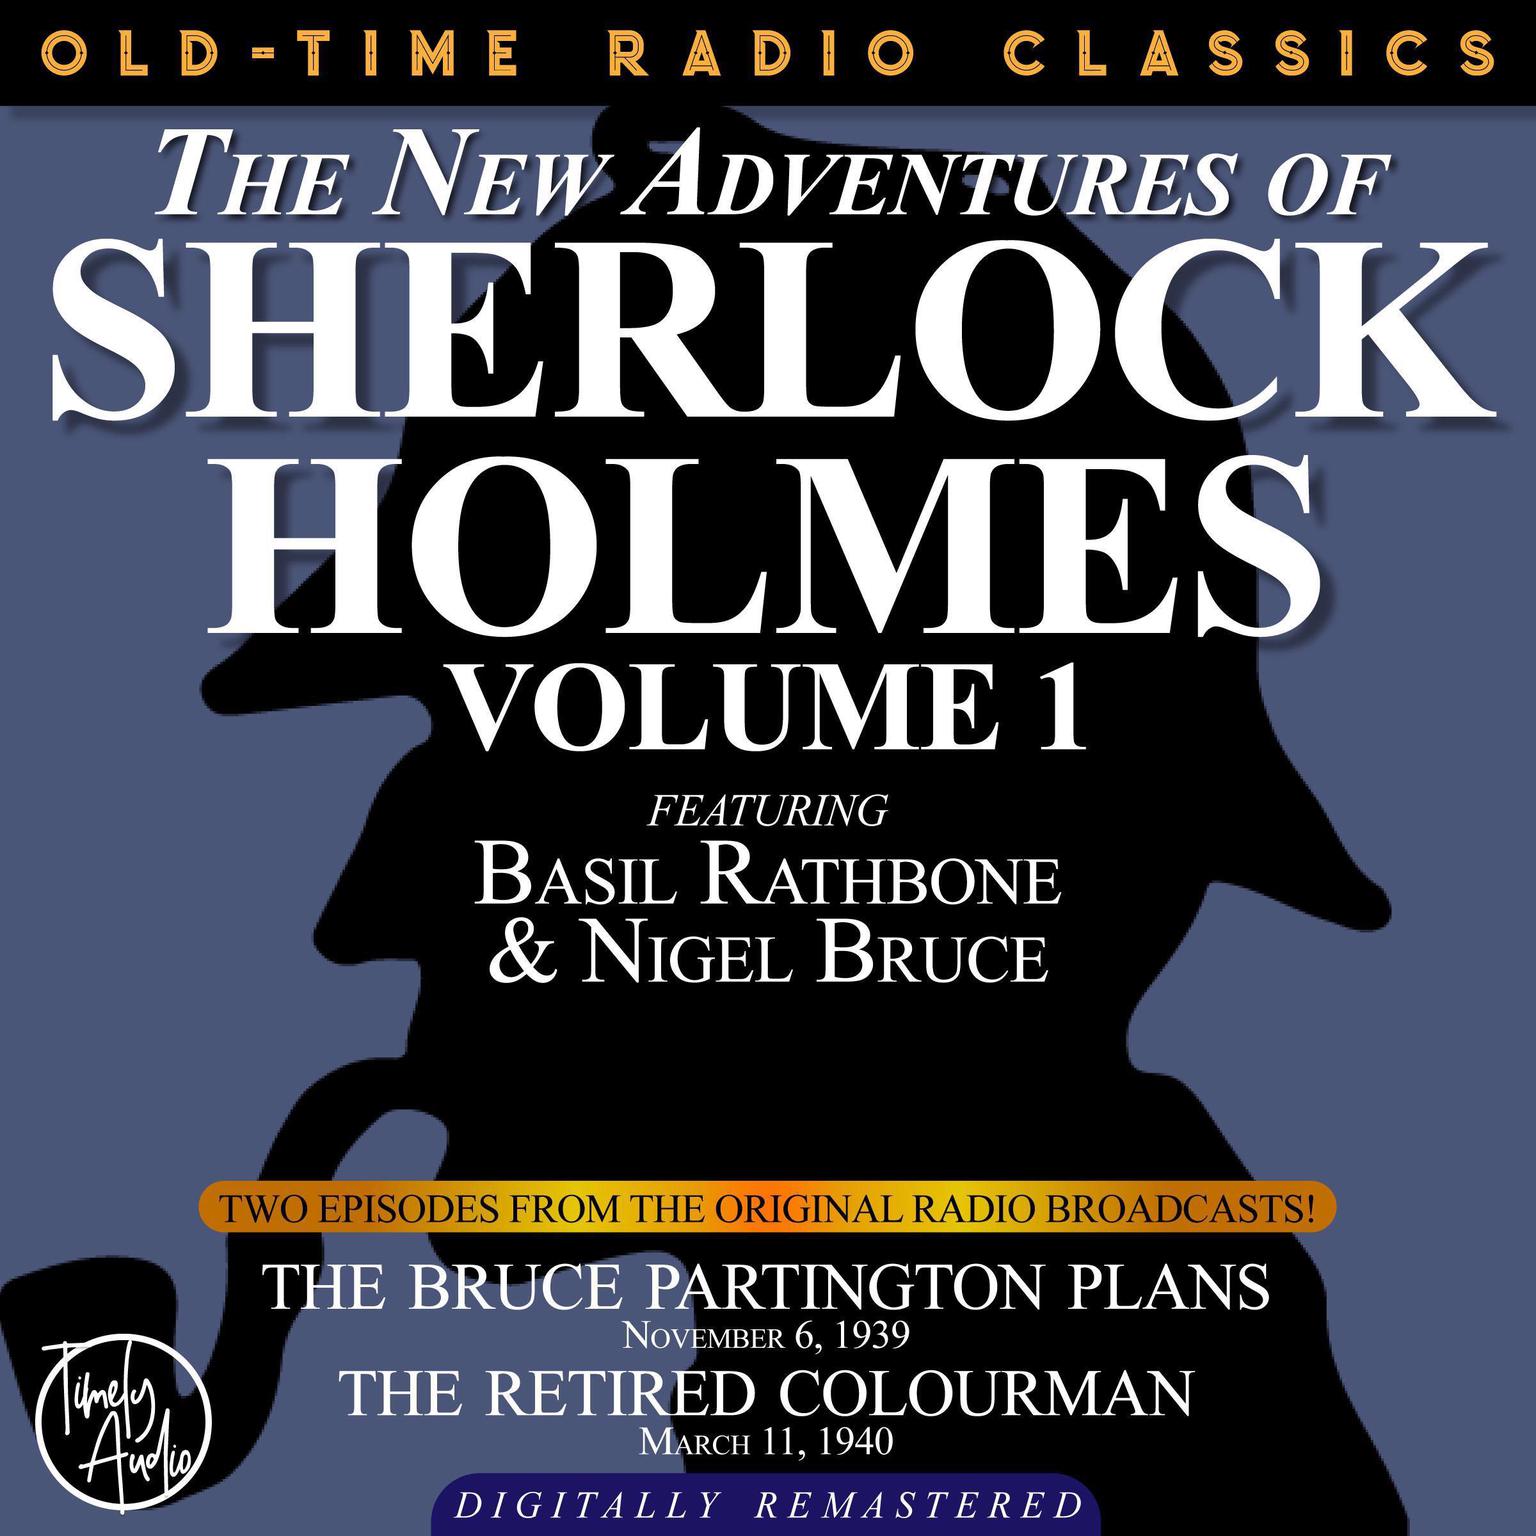 THE NEW ADVENTURES OF SHERLOCK HOLMES, VOLUME 1: EPISODE 1: THE BRUCE-PARTINGTON PLANS.  EPISODE 2: EPISODE 2: THE RETIRED COLOURMAN. Audiobook, by Arthur Conan Doyle